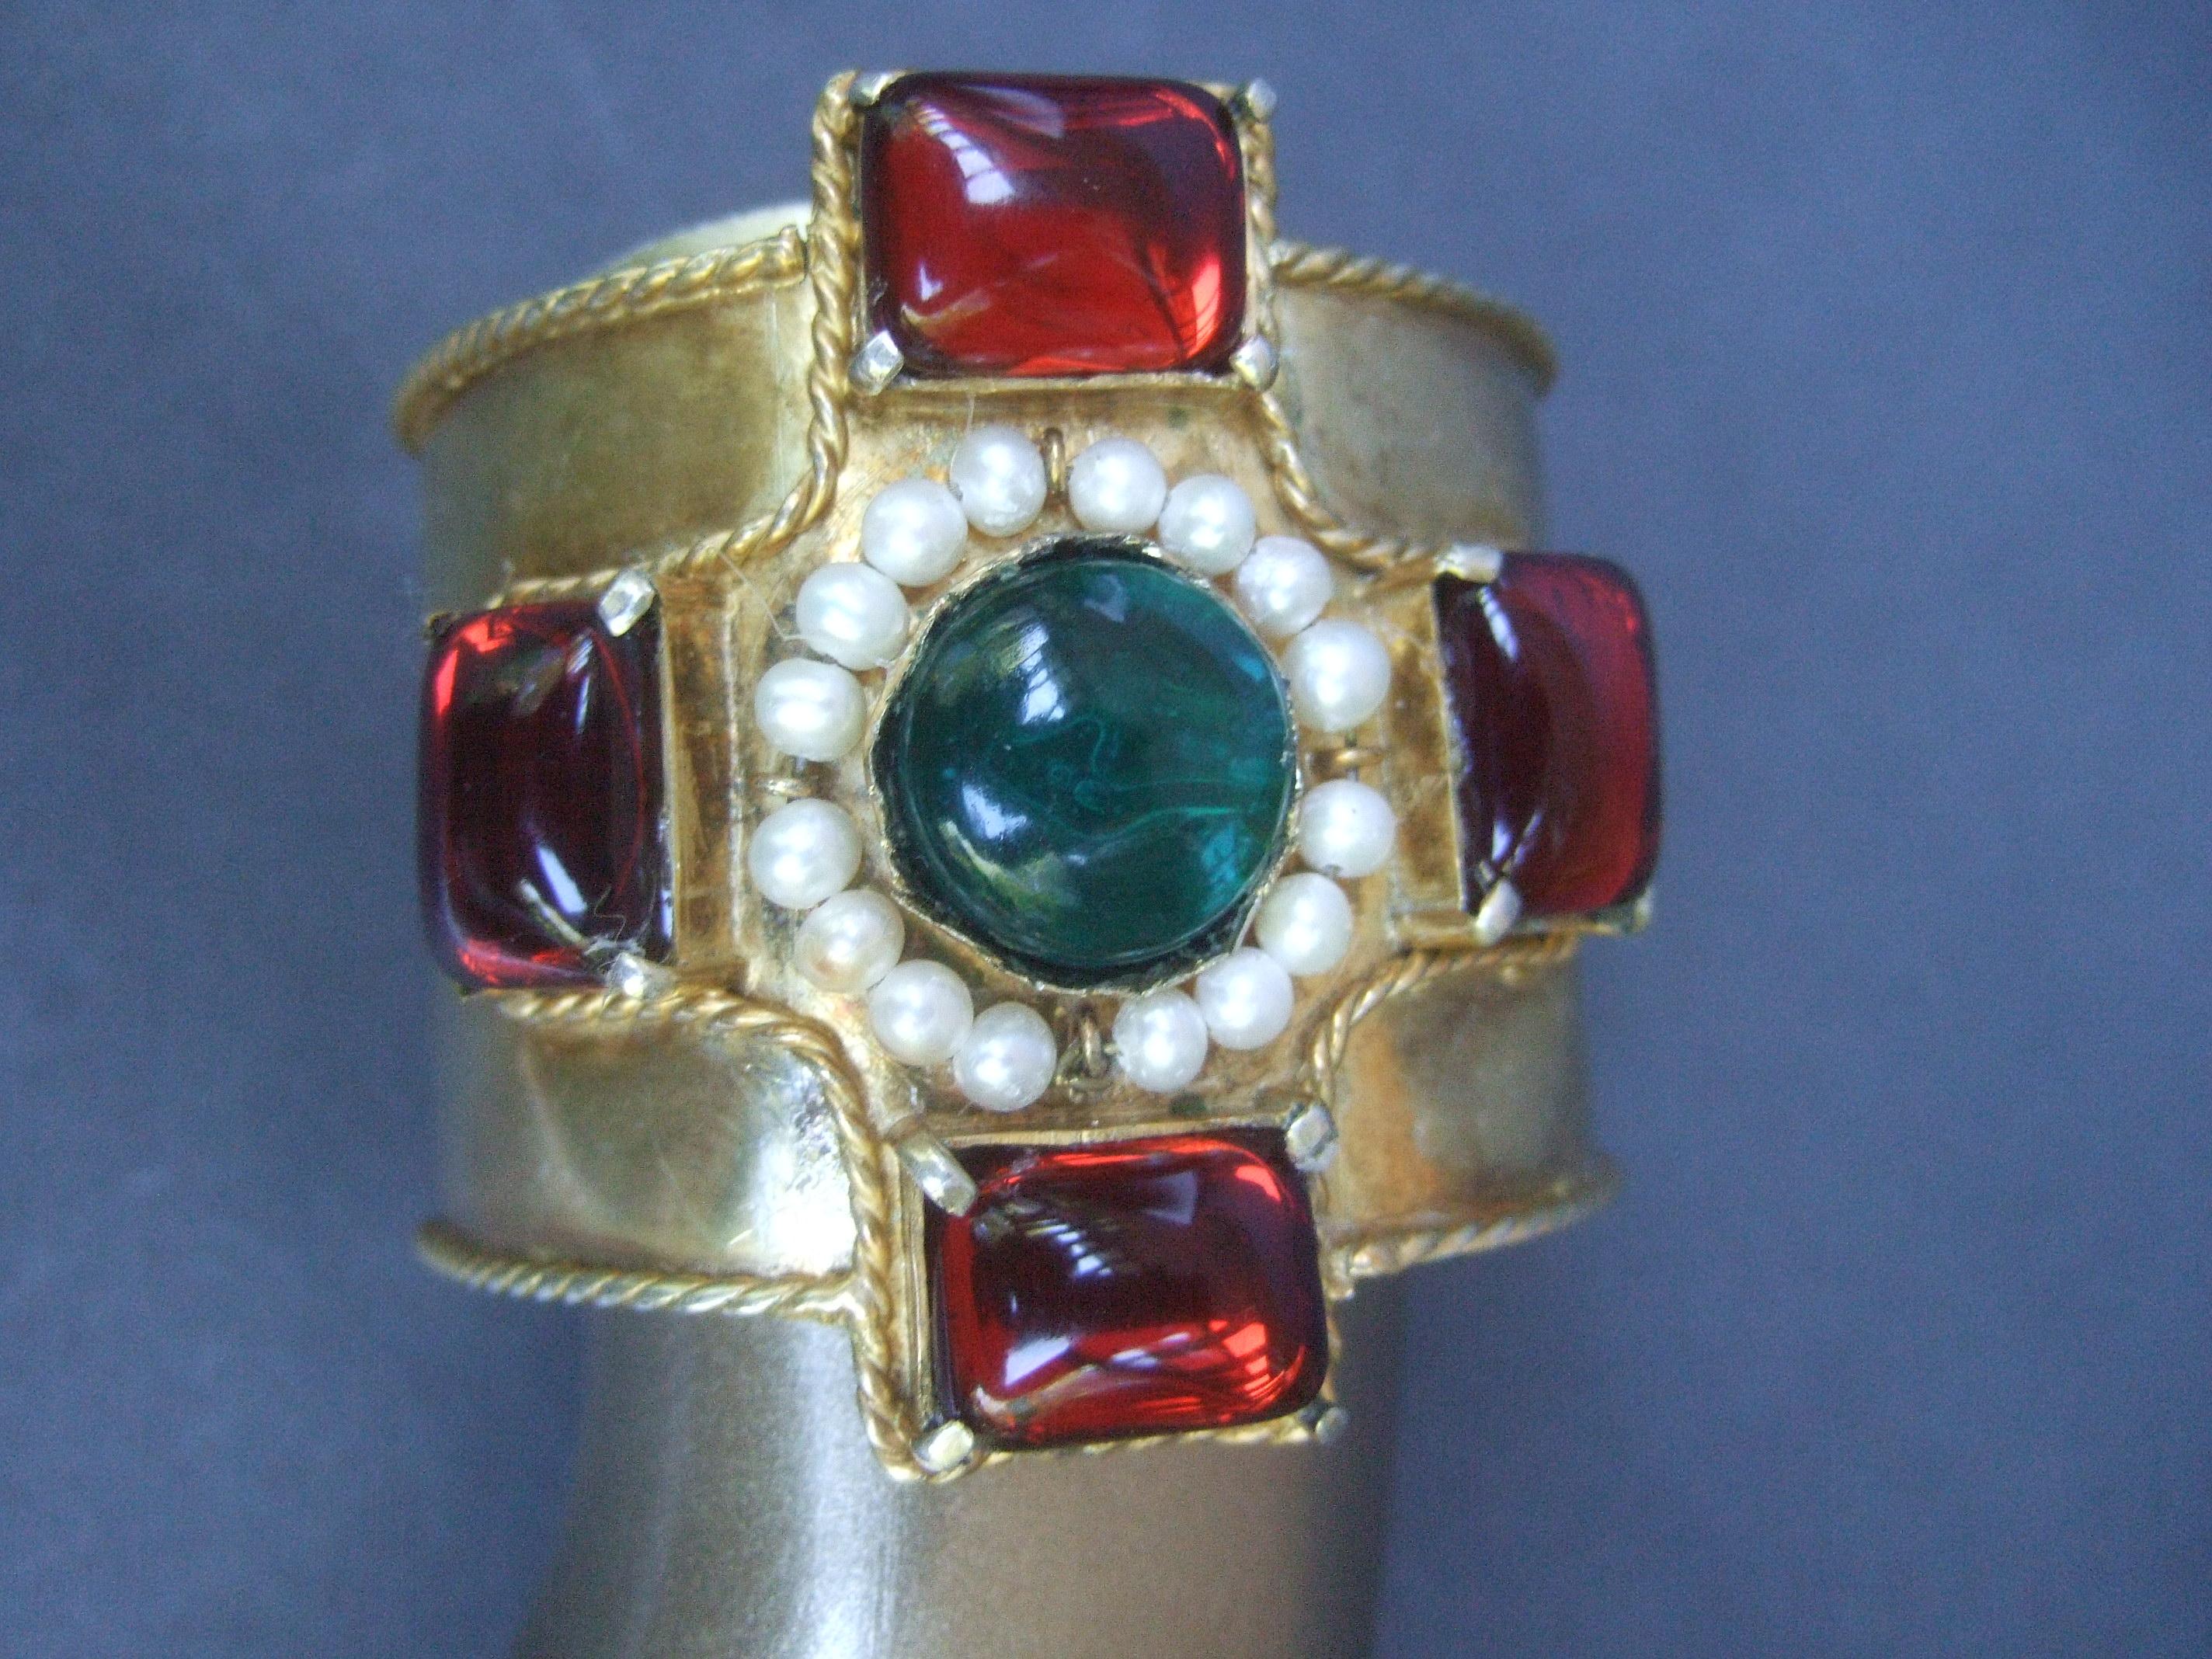 Chanel Maison Gripoix Byzantine style poured glass wide gilt metal cuff bracelet in Chanel box c 1984
The opulent Chanel wide gilt metal cuff bracelet is adorned with a cluster of deep red smooth poured glass translucent rectangular shaped stones in